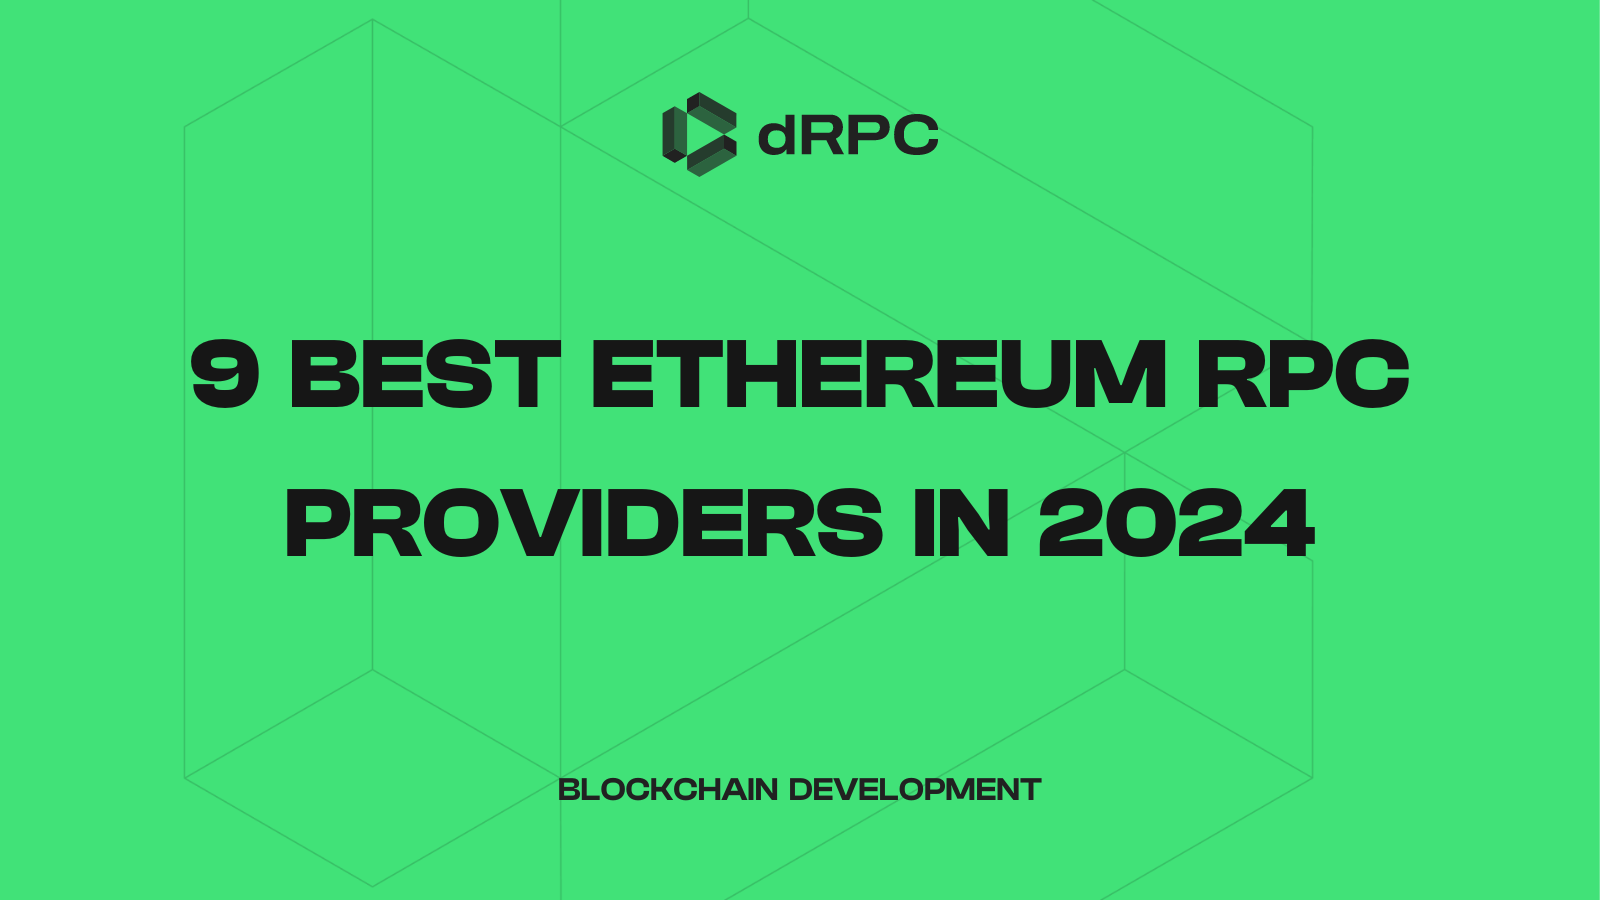 9 Best Ethereum RPC Providers in 2024